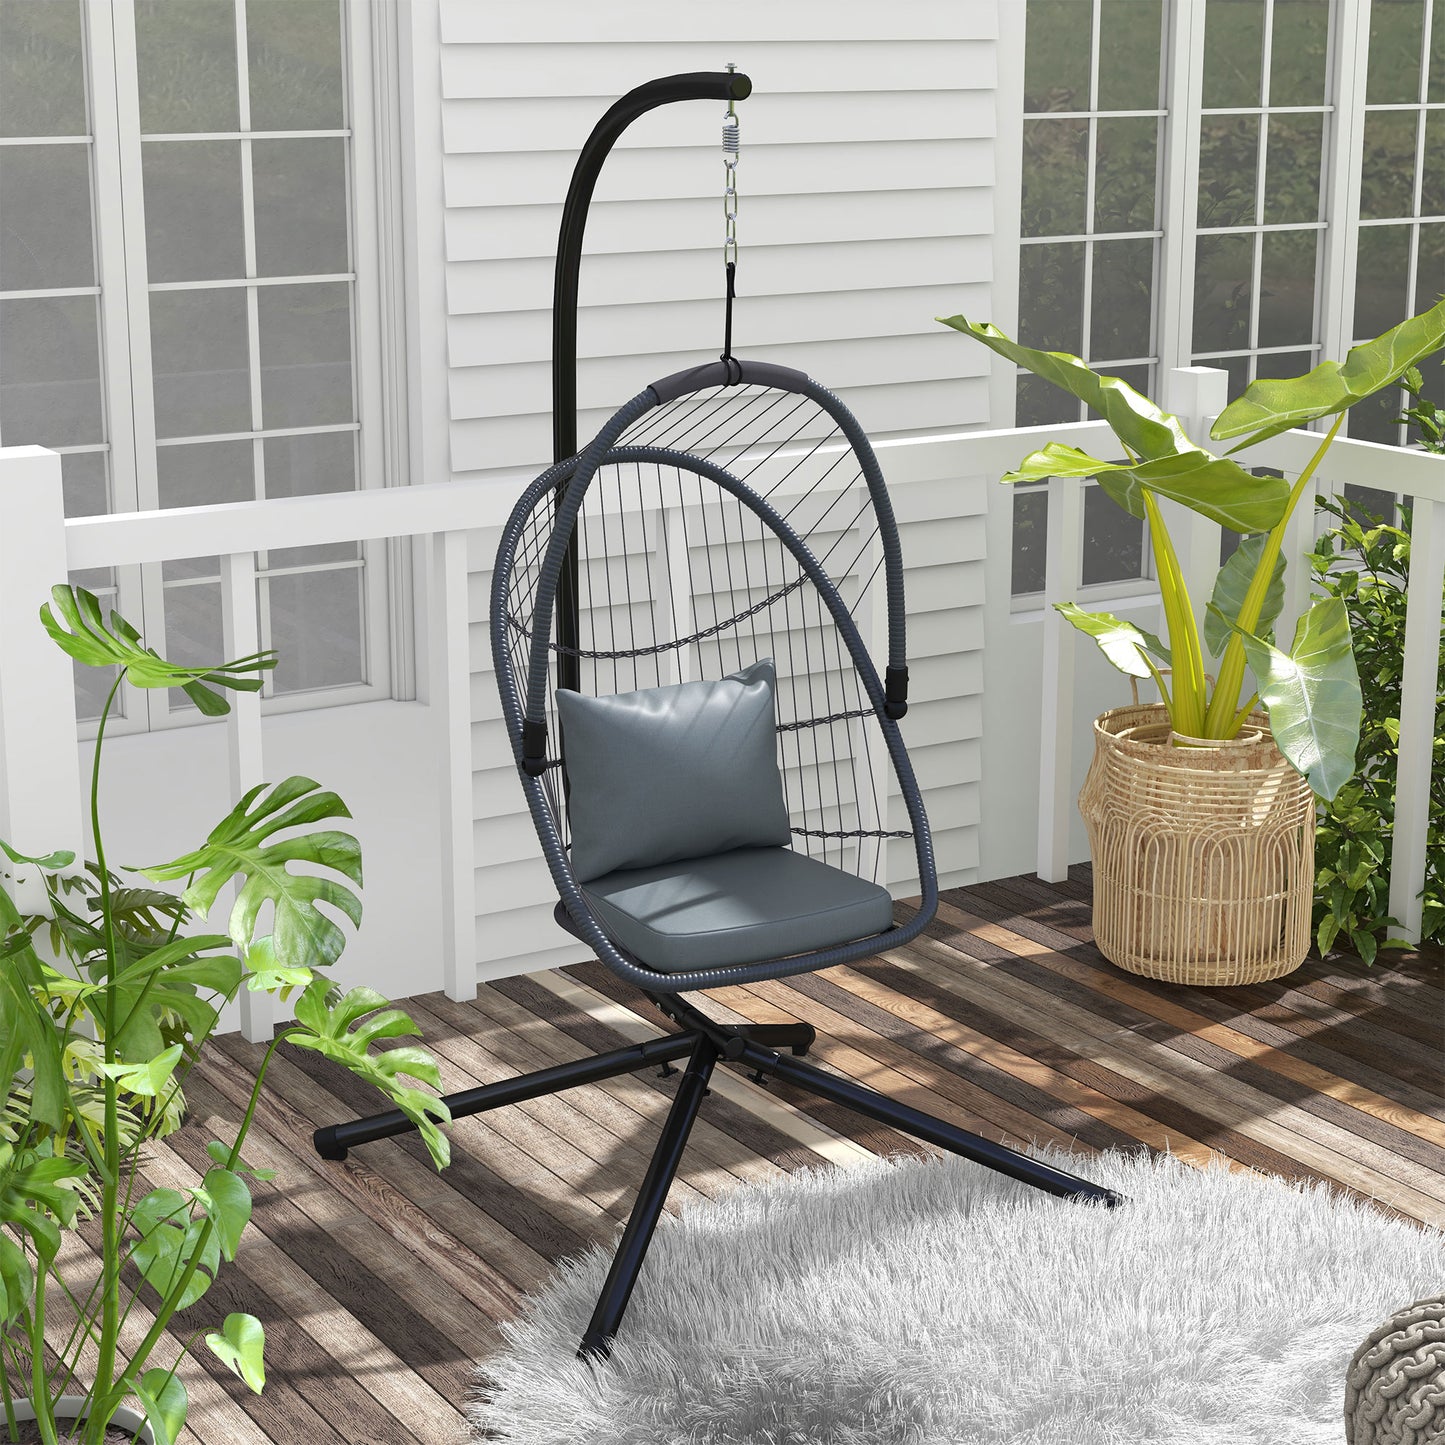 Outsunny Single Egg Chair, with Steel Frame Stand - Grey